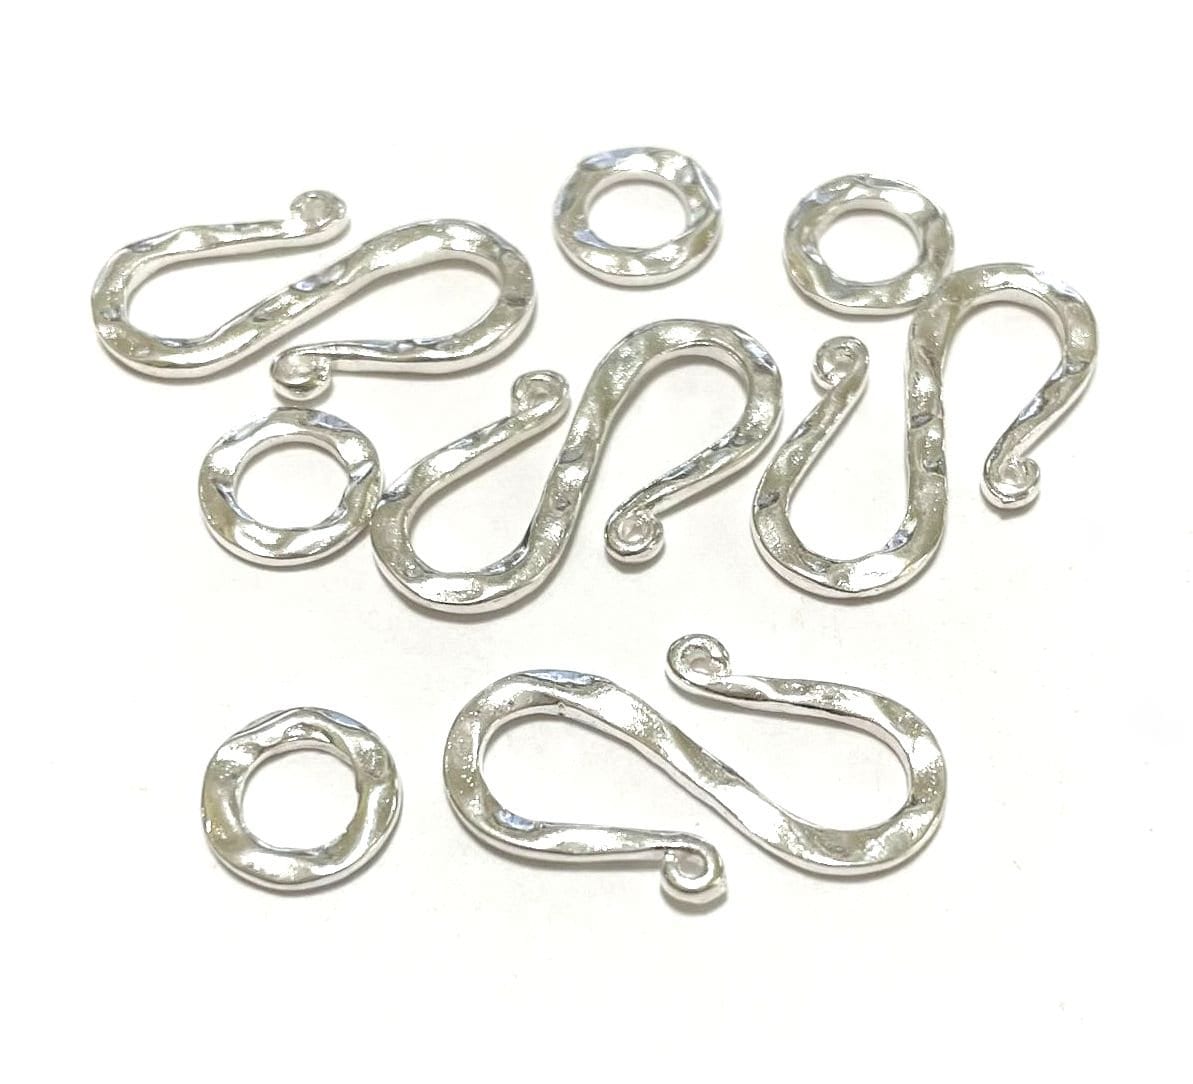 5Pc, Silver Necklace Clasps, Hook Clasps, Bracelet Findings, Silver Plated  Toggle, Fish Hook Clasp, Nautical Bracelet, Jewelry Findings